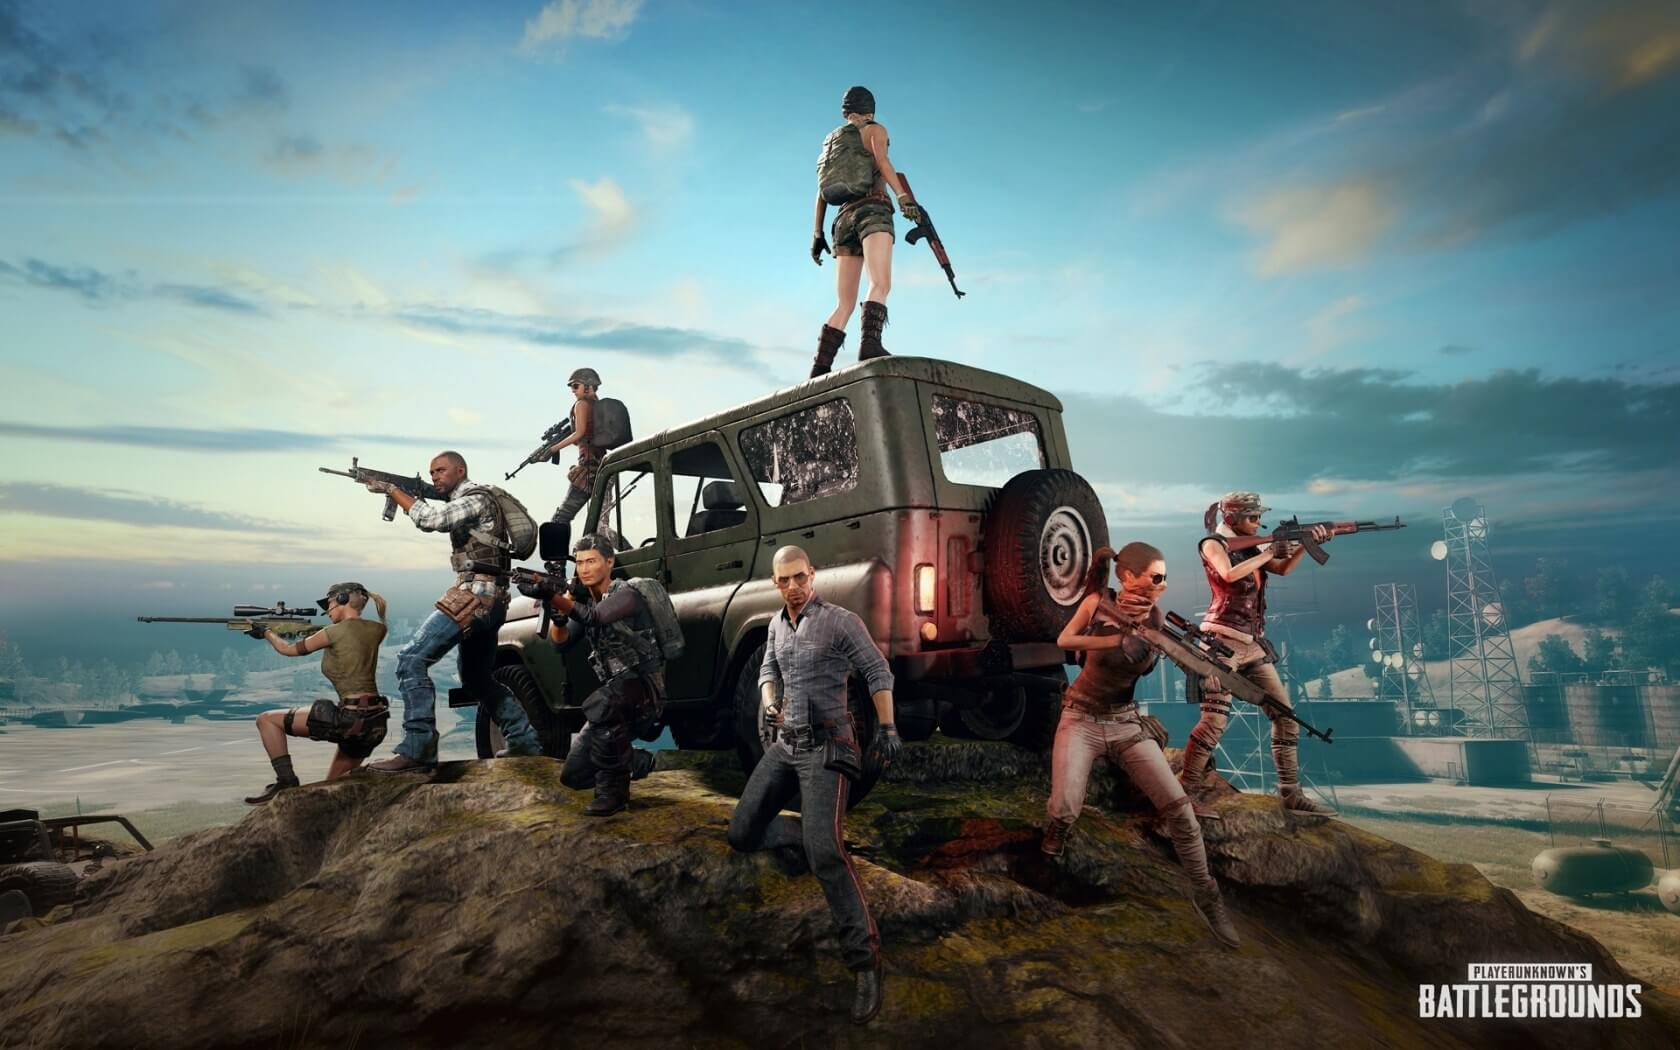 Kwik chrysant Dakraam Xbox One version of PUBG officially leaves early access in September |  TechSpot